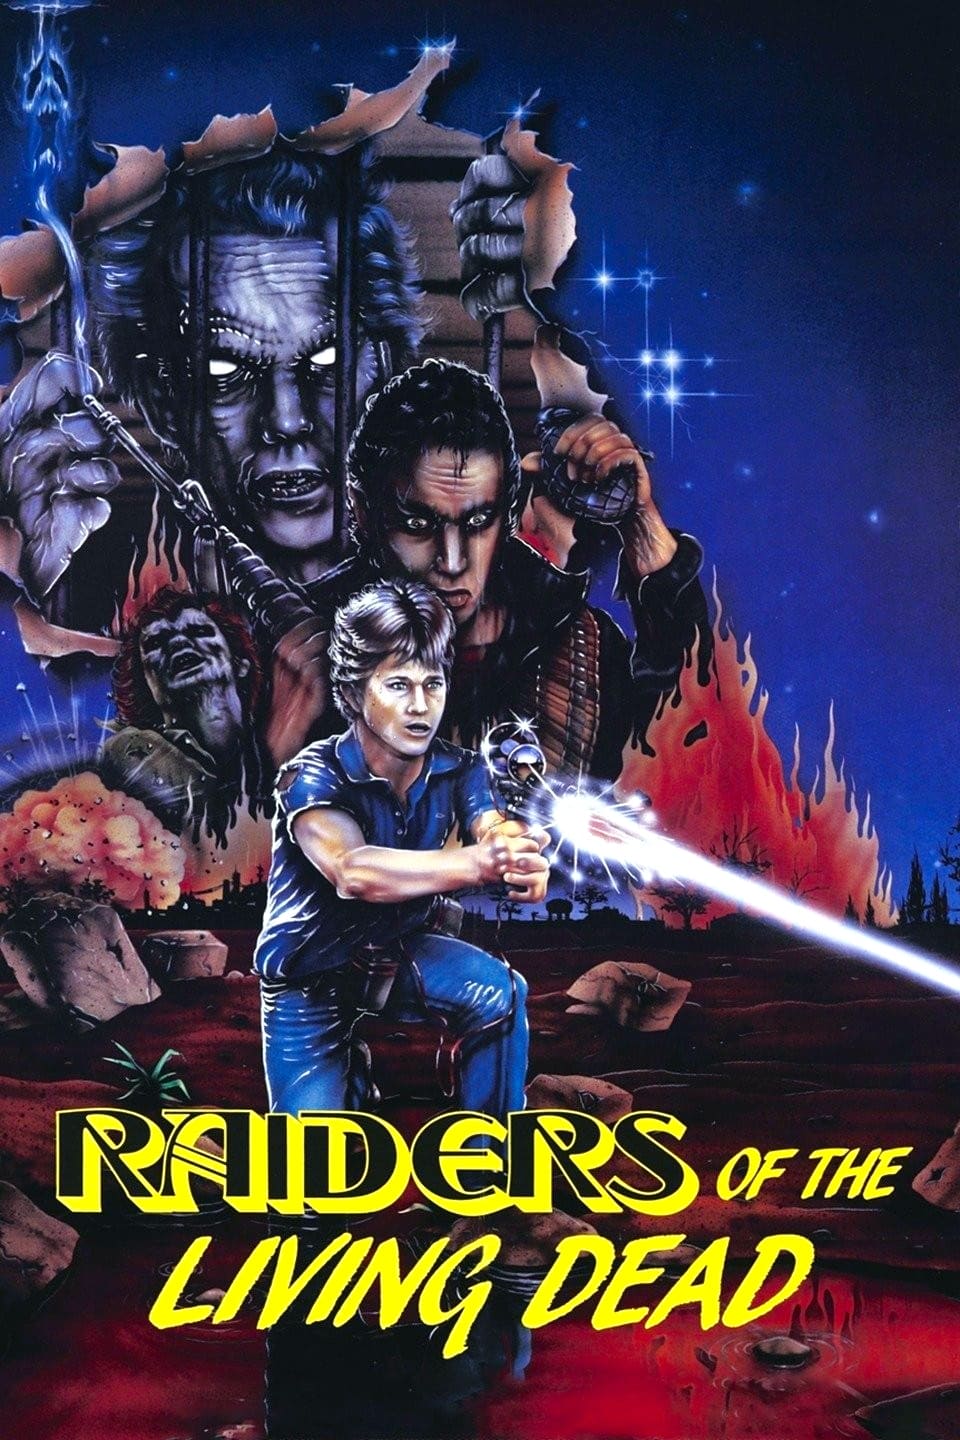 Raiders of the Living Dead